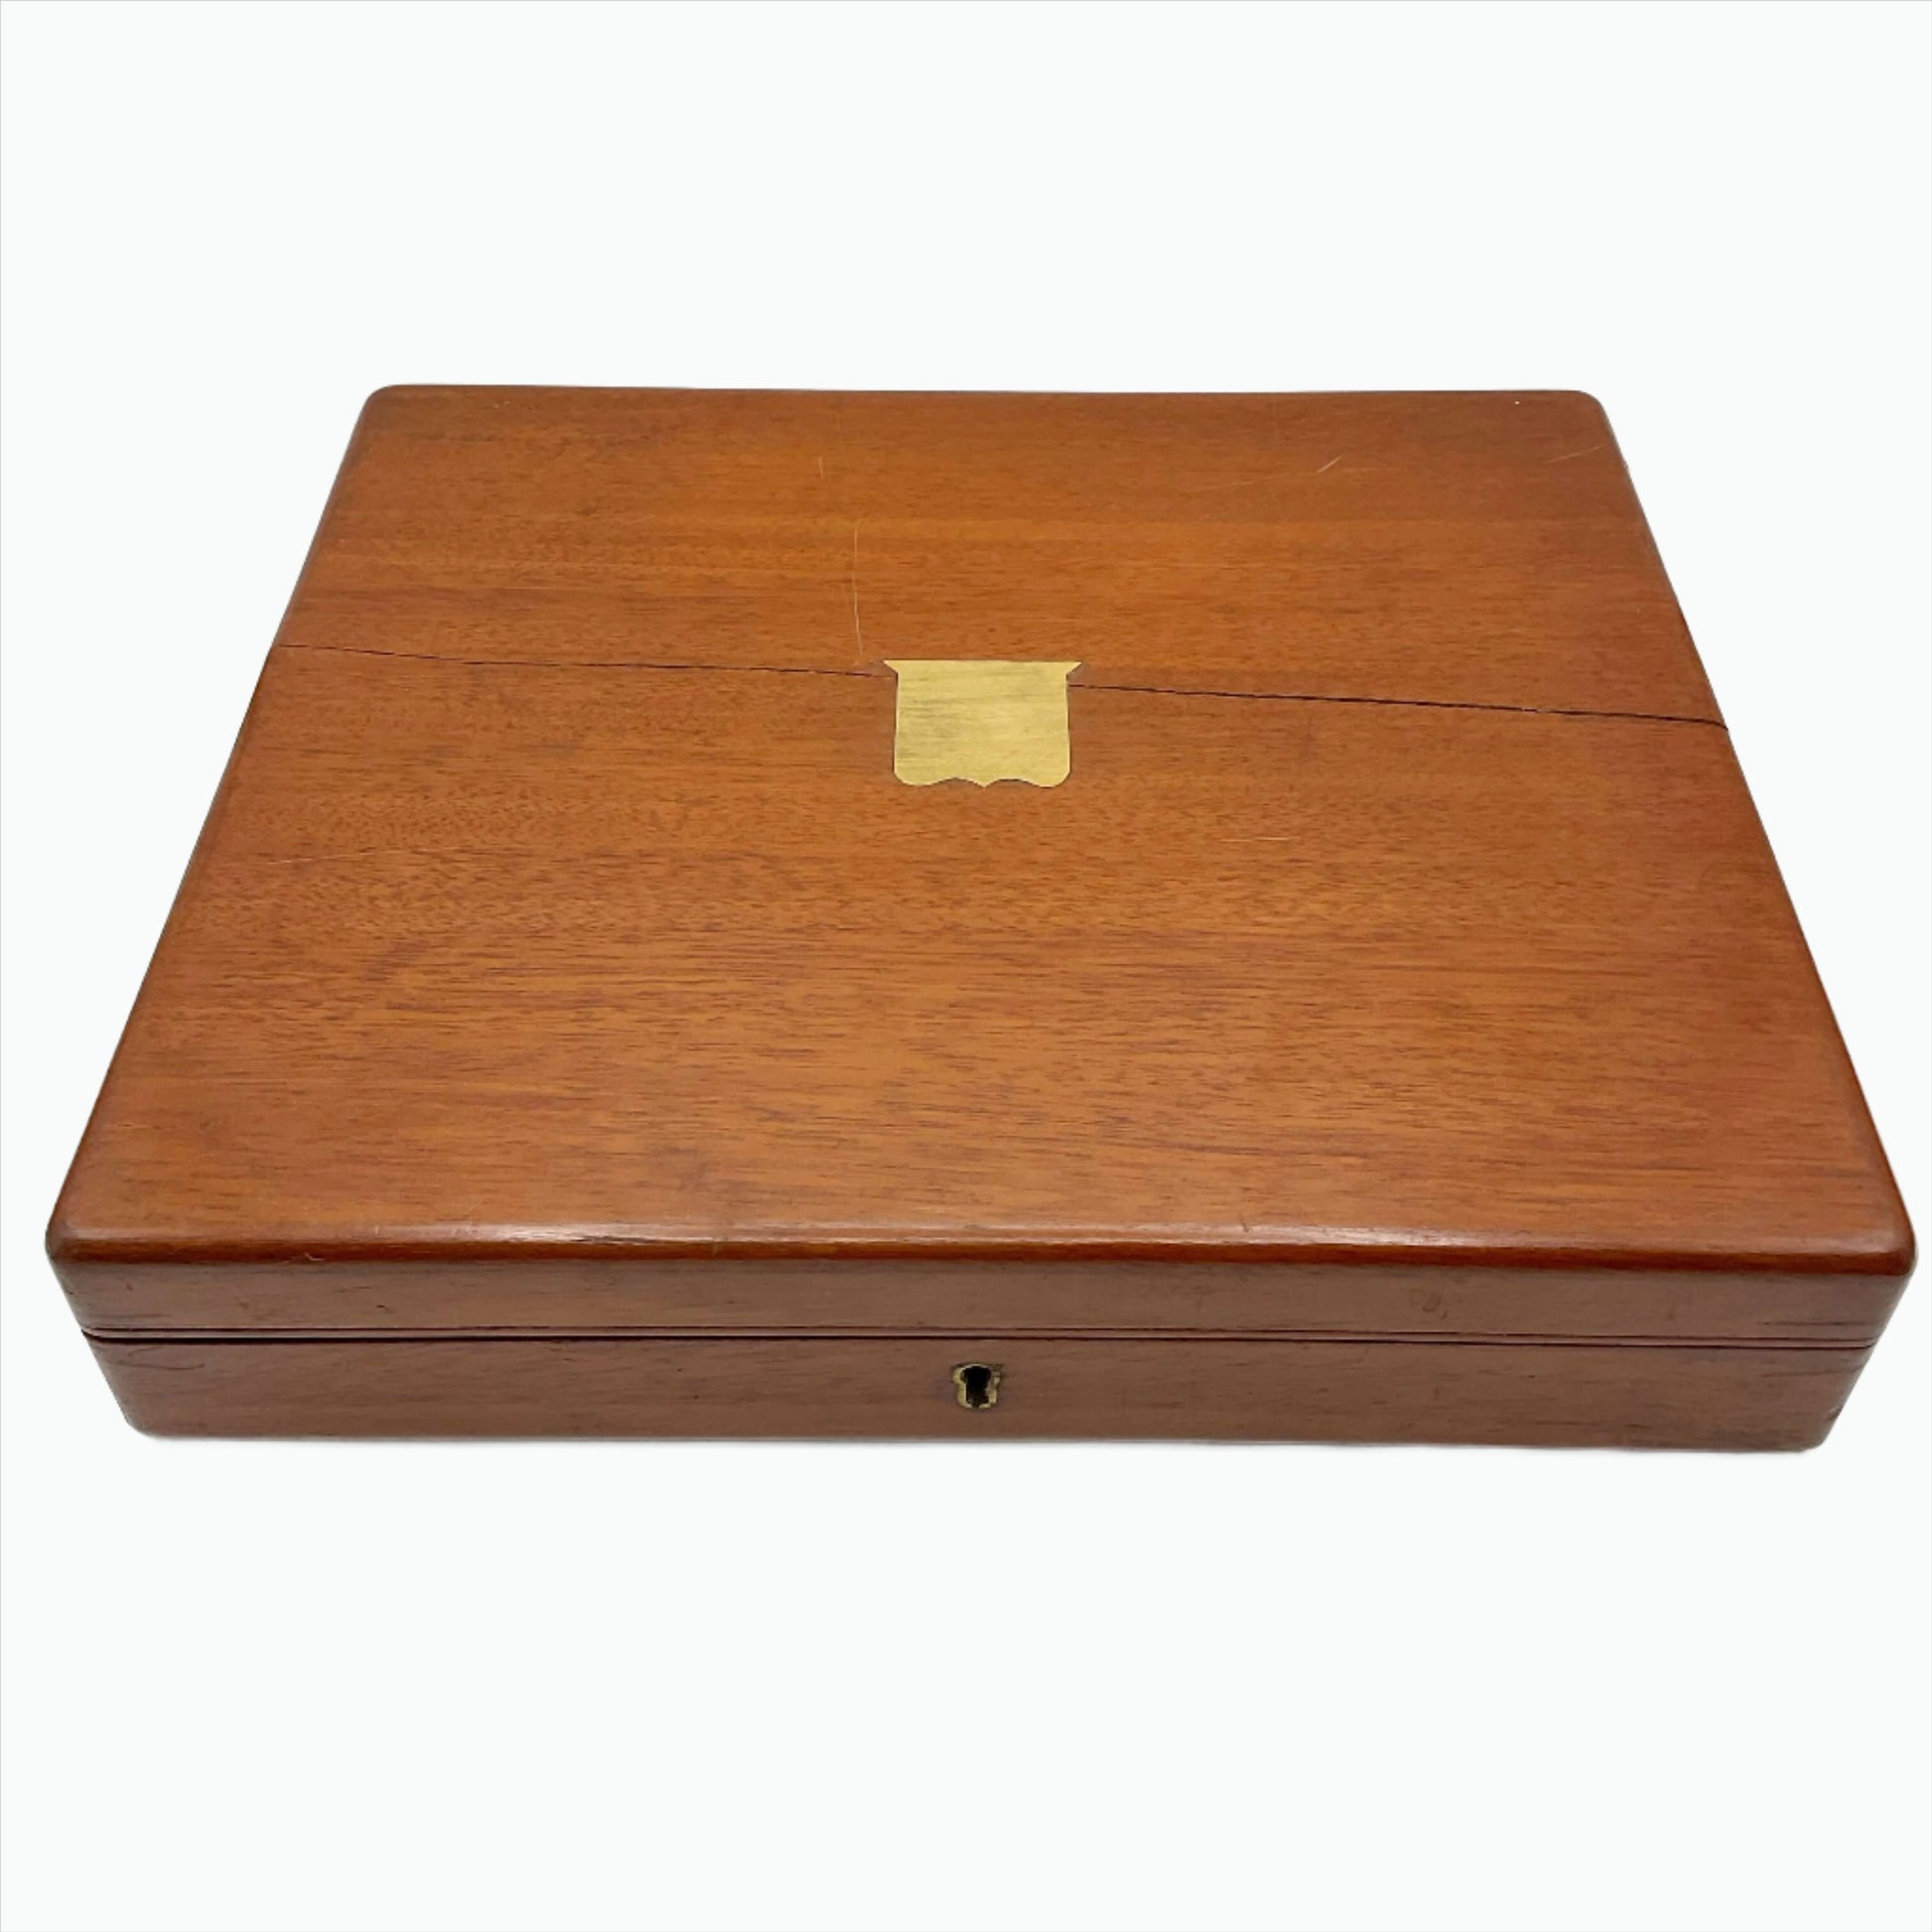 Antique wooden box with a brass shield in the centre on a white background